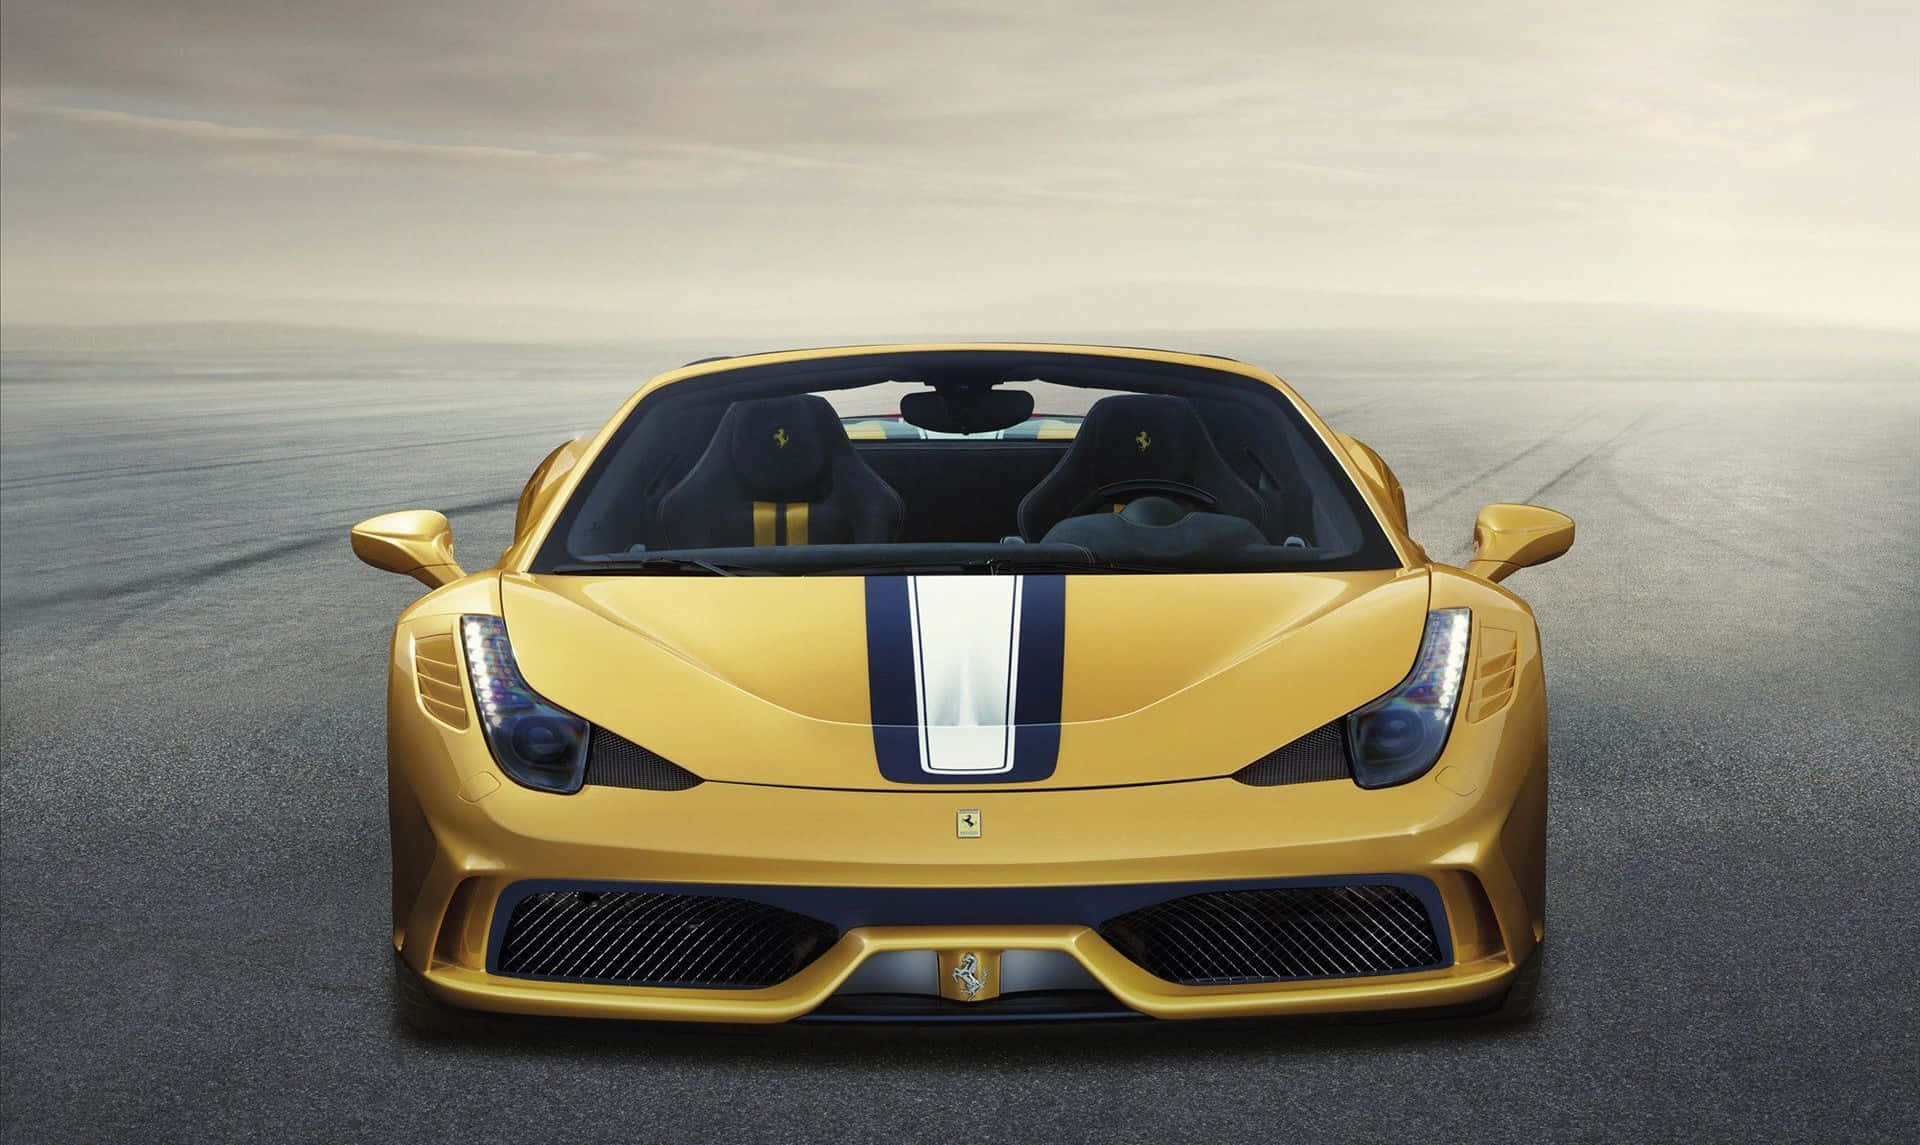 Sleek and Powerful Ferrari 458 Speciale in Action Wallpaper